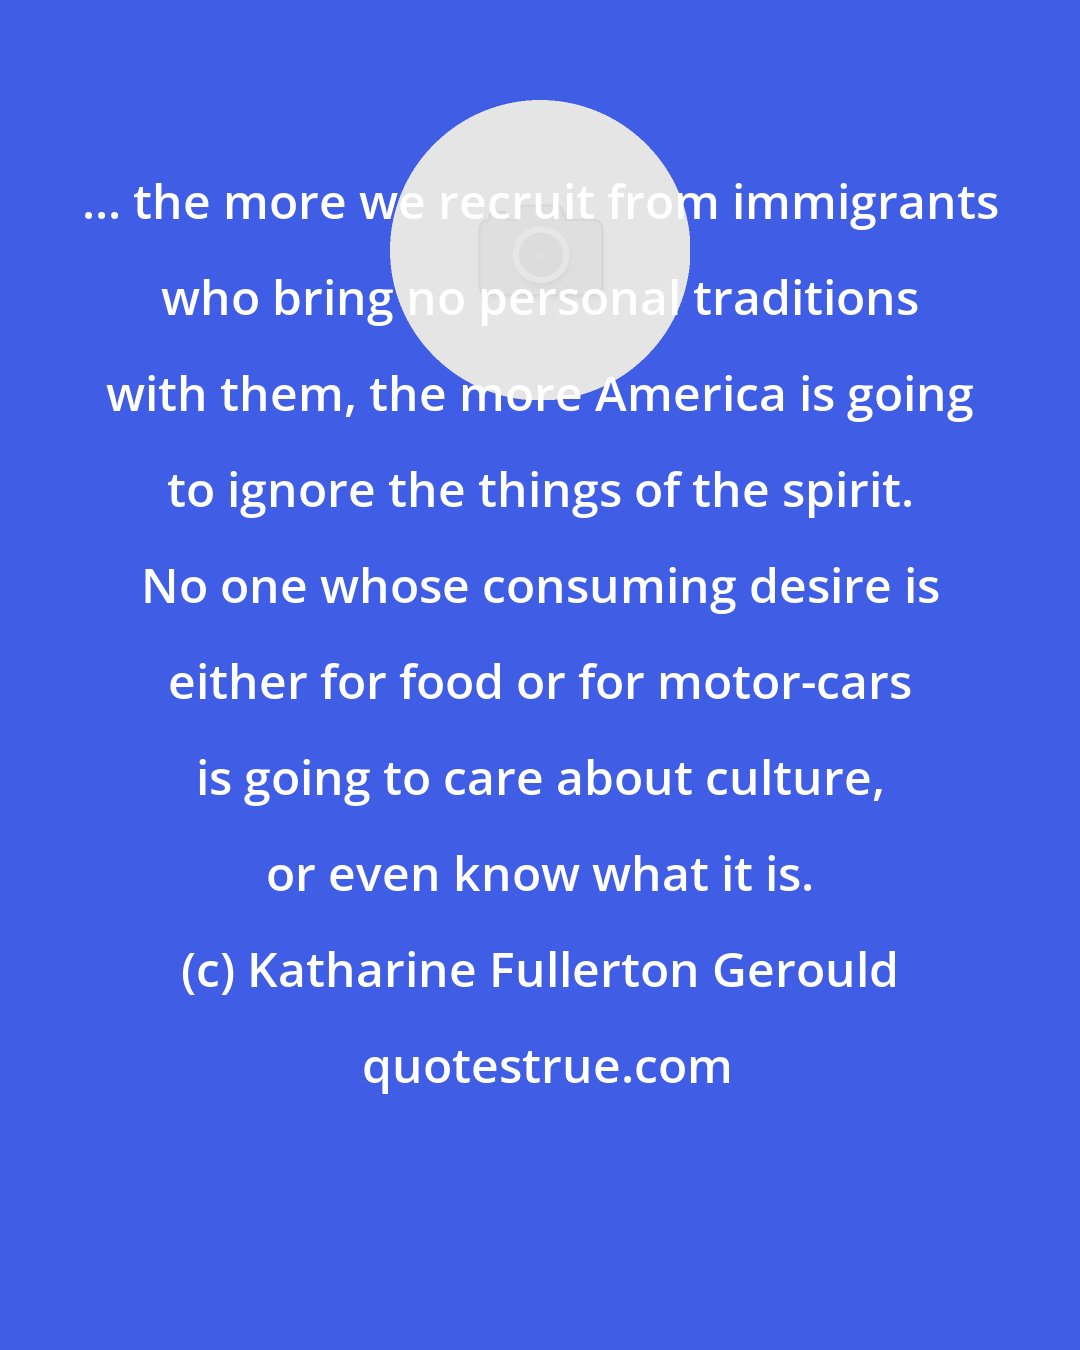 Katharine Fullerton Gerould: ... the more we recruit from immigrants who bring no personal traditions with them, the more America is going to ignore the things of the spirit. No one whose consuming desire is either for food or for motor-cars is going to care about culture, or even know what it is.